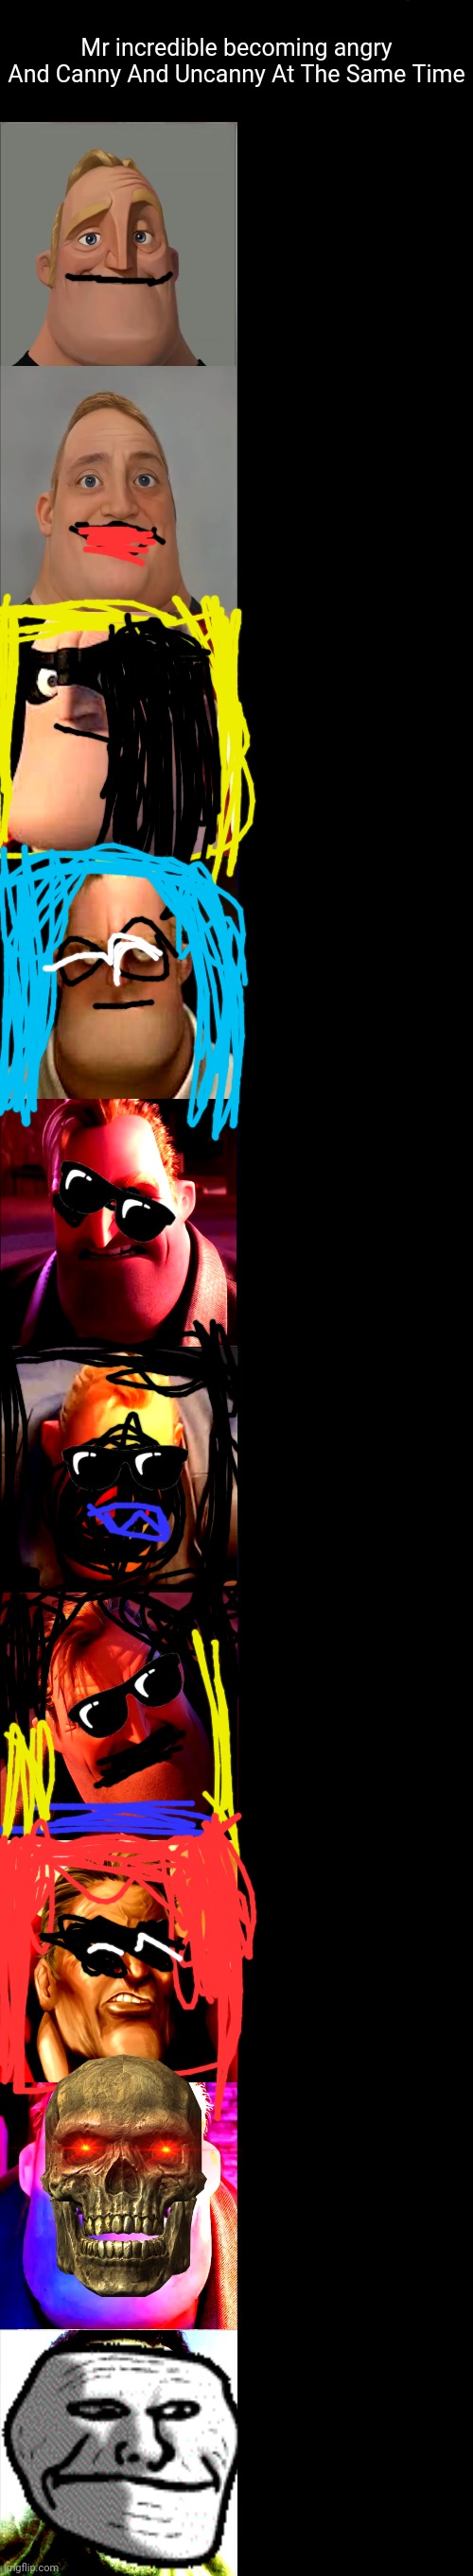 Mr. Incredible Becoming Uncanny Template (My Version) - Imgur